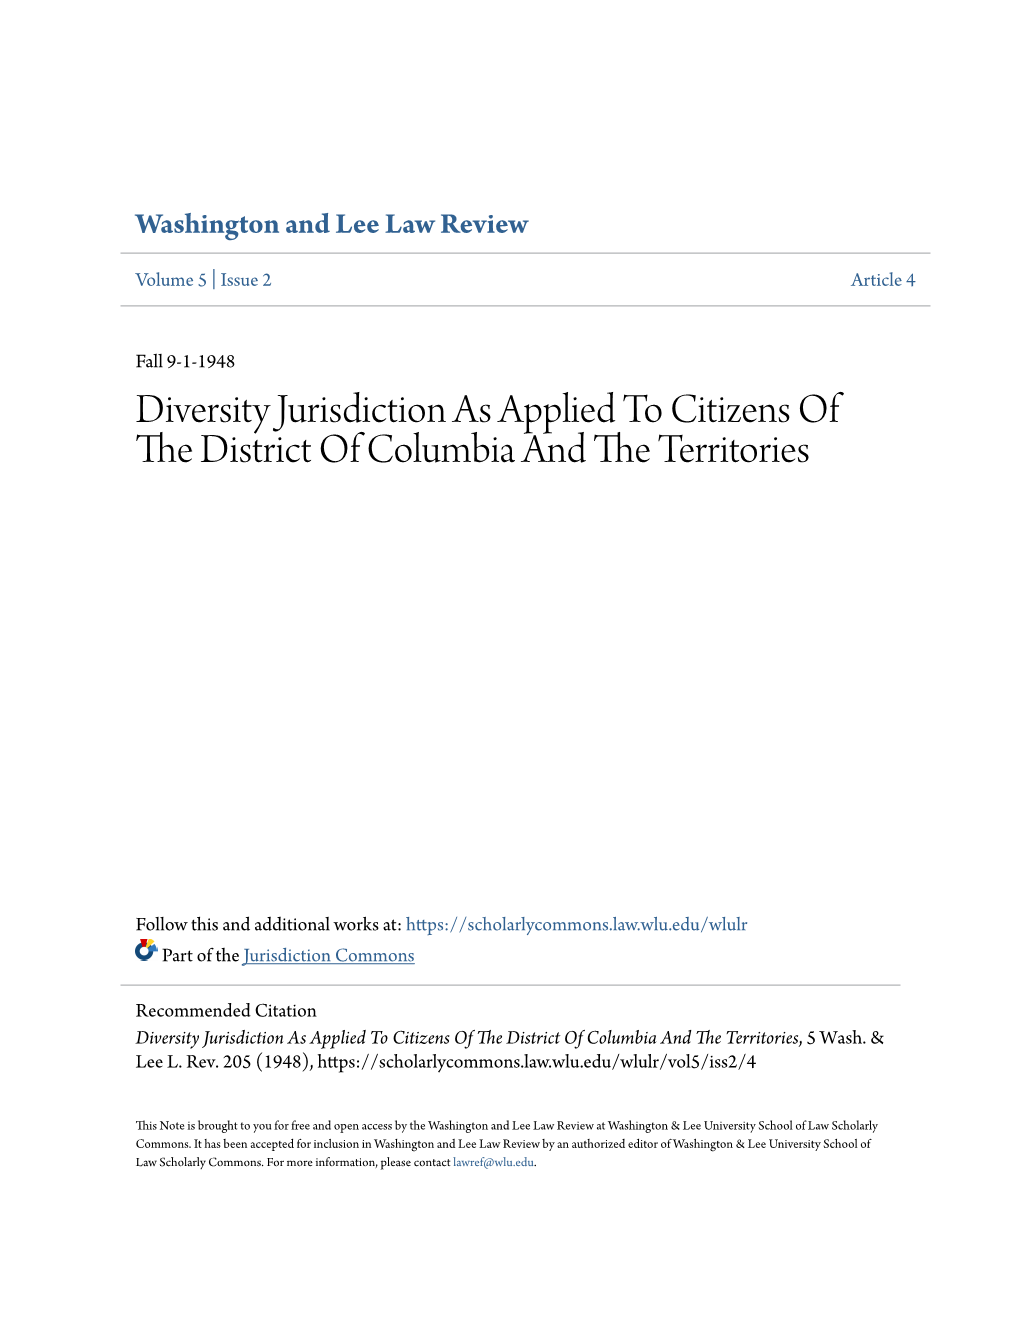 Diversity Jurisdiction As Applied to Citizens of the District of Columbia and the Territories, 5 Wash